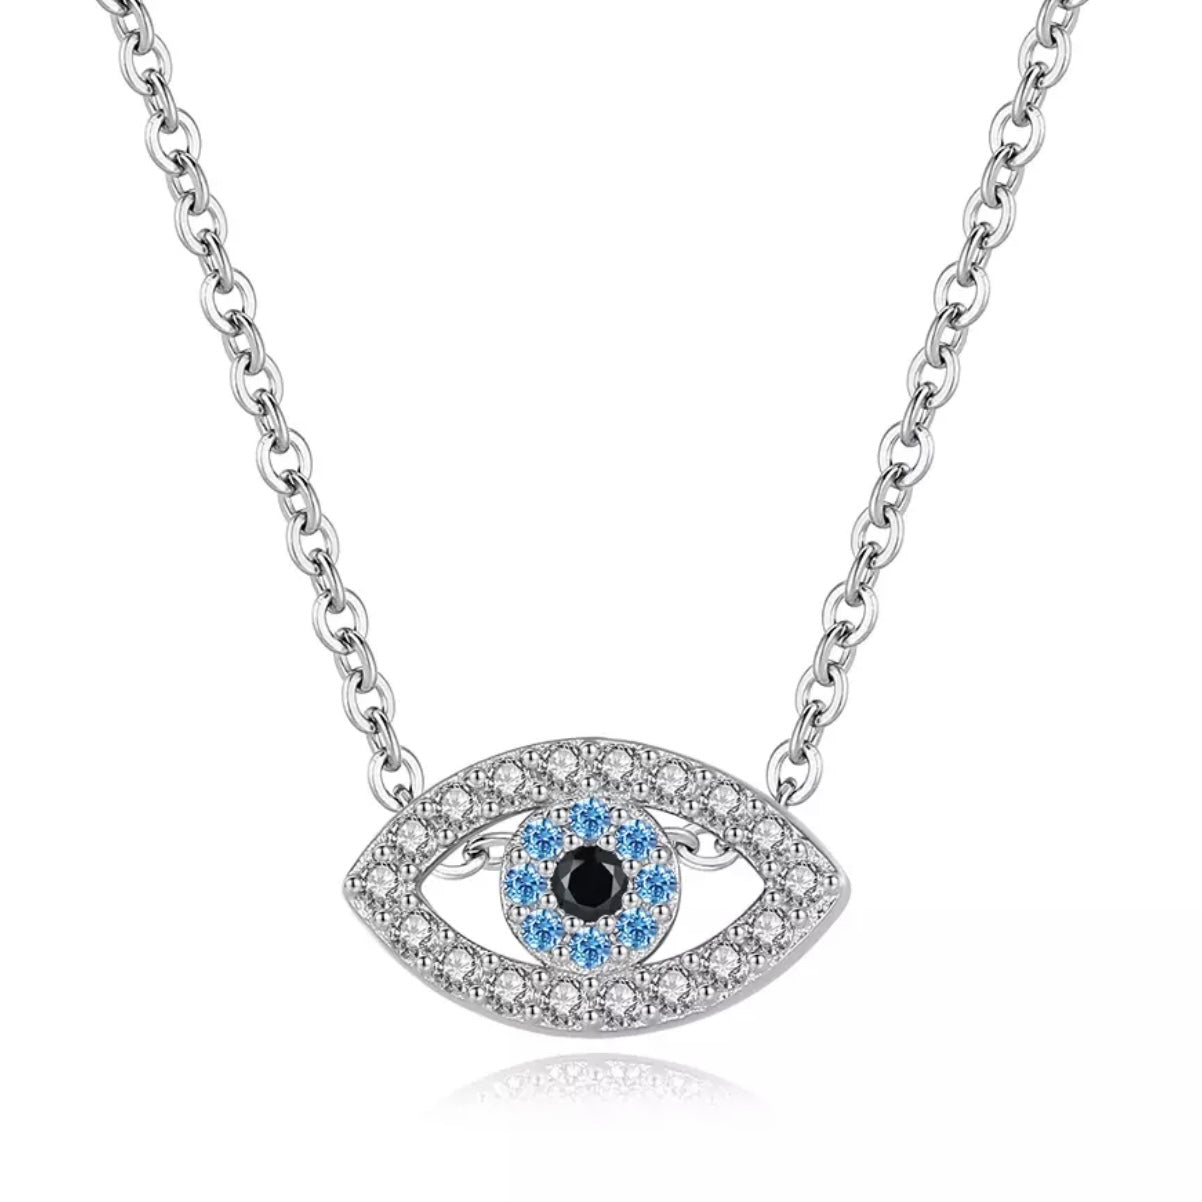 CAPRIA STERLING SILVER WITH CZ STONES EVIL EYE NECKLACE